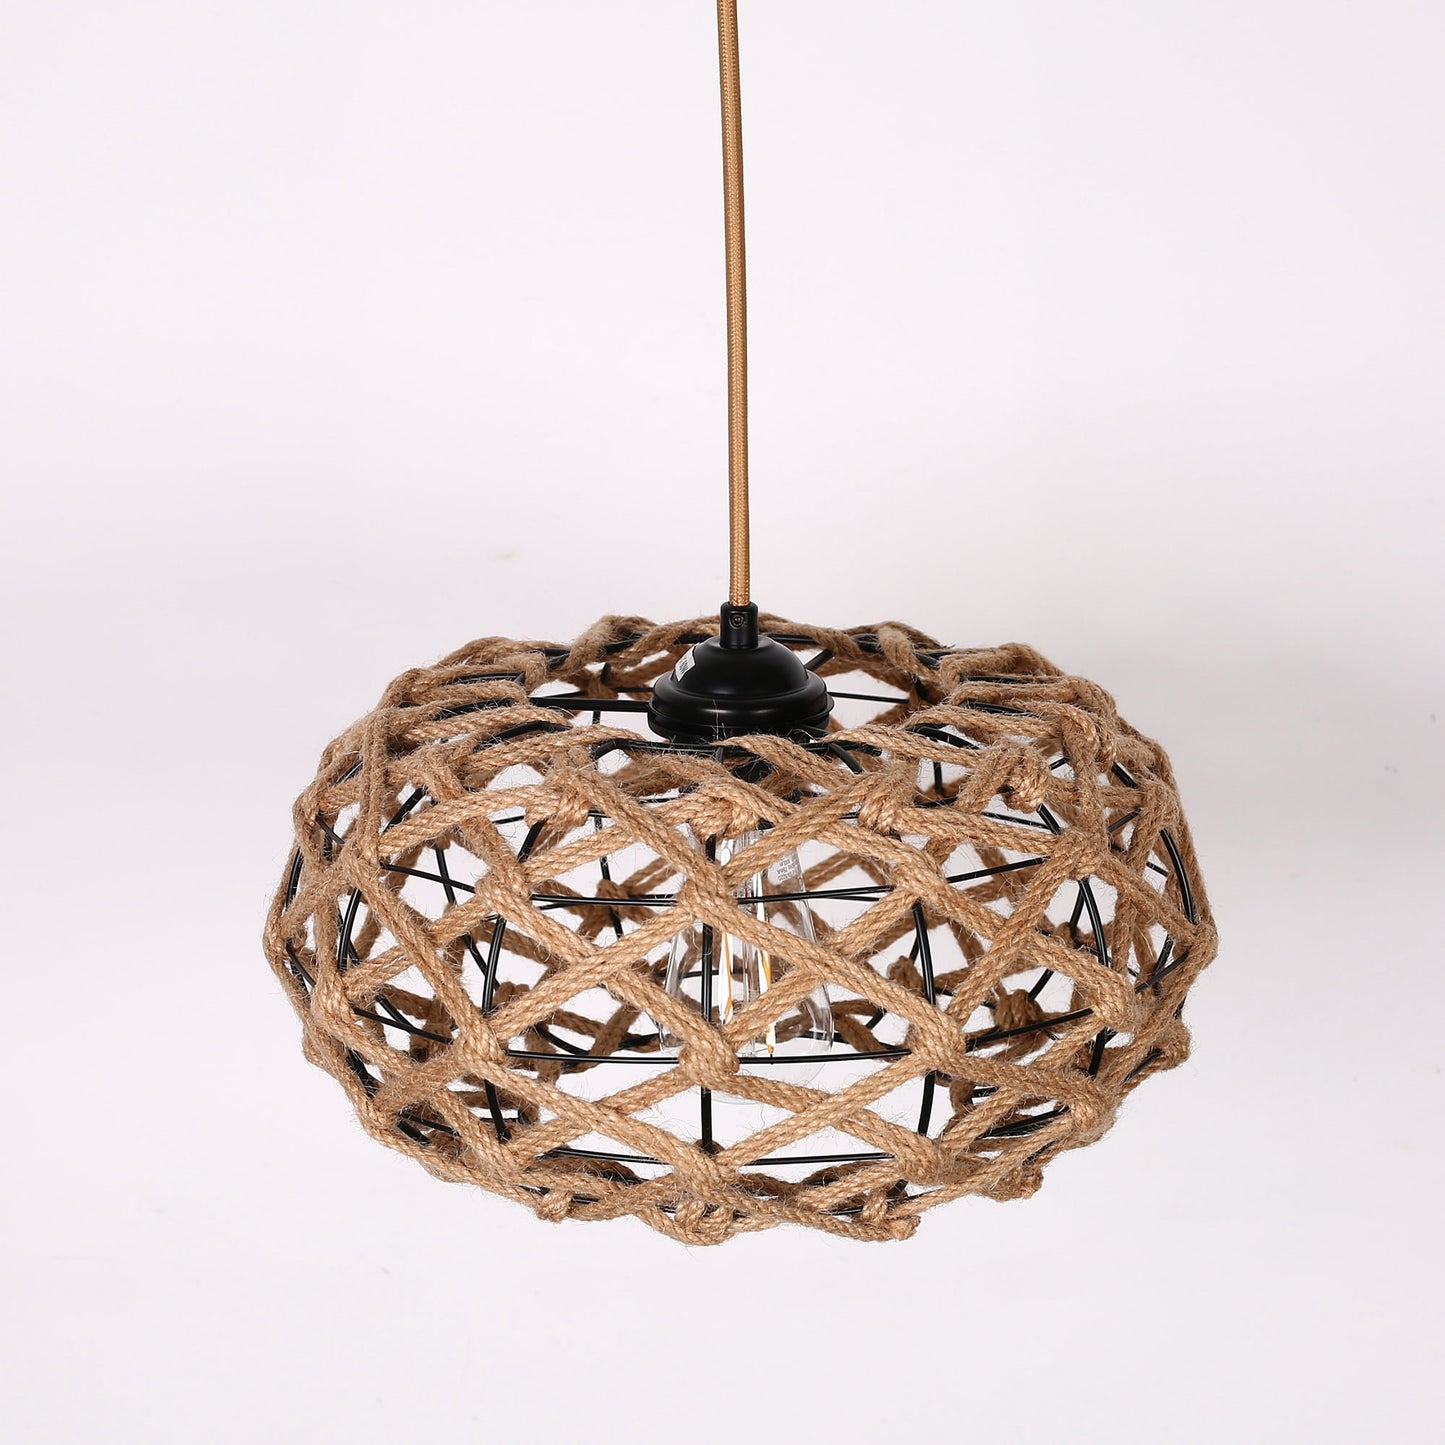 1-Light Retro Basket Plug-in Hand Woven Hemp Cage Adjustable Height Pendant Light with Dimming Switch For Home Livingroom